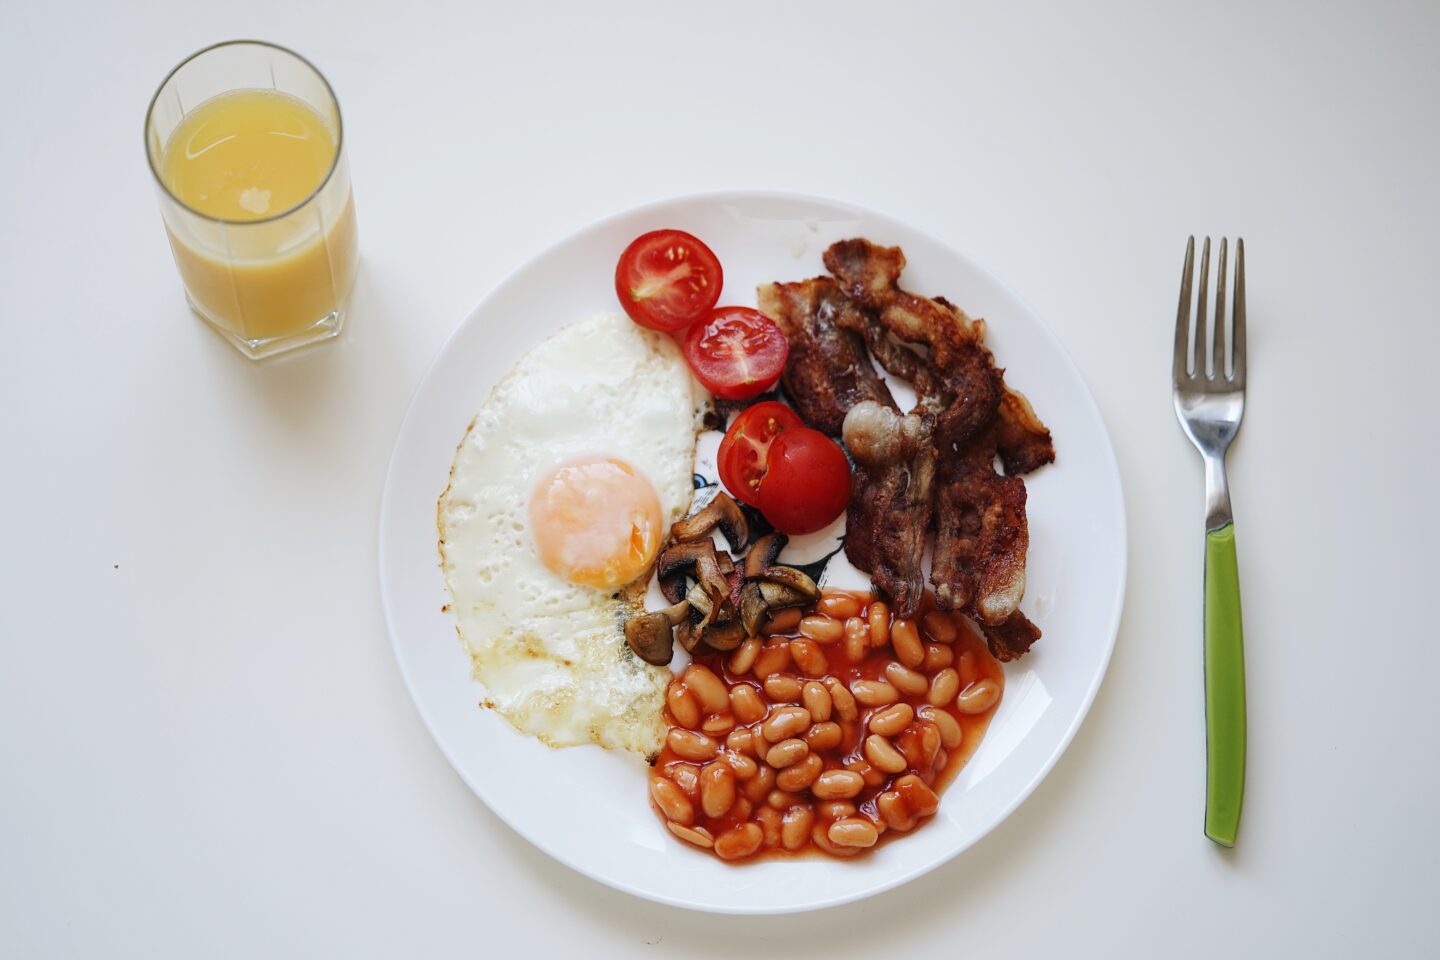 White table with an aerial view of a half glass of orange juice to the top left of a round white plate containing 4 baby tomato halves, a fried egg, some beans, cooked mushrooms, and several slices of bacon, with a green handled silver fork to the right of the plate